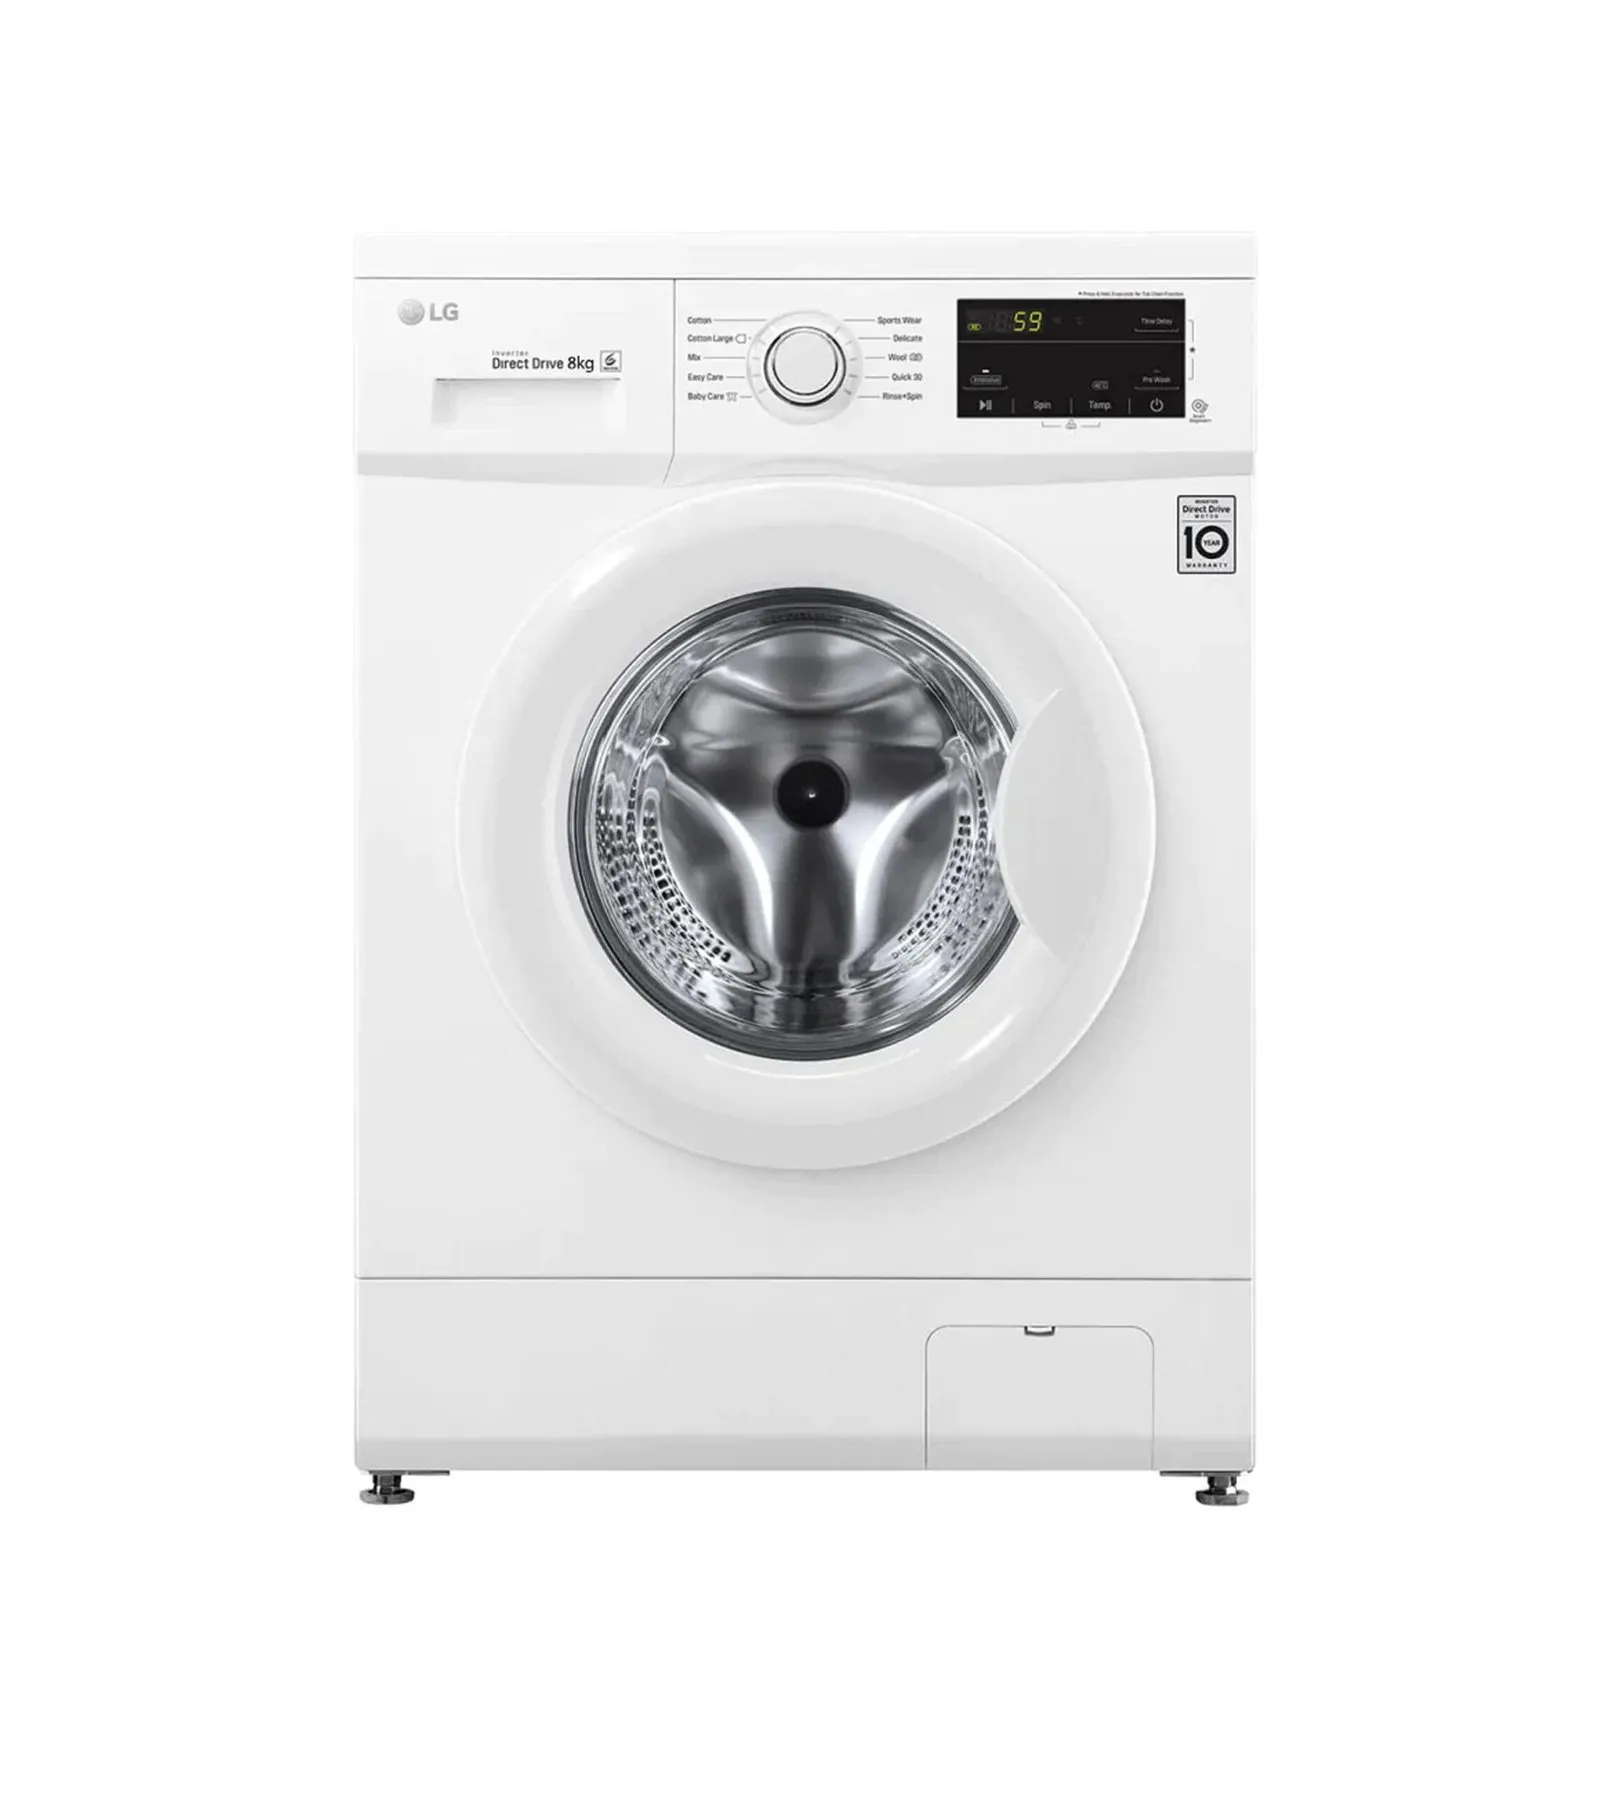 LG 8 Kg Front Load Washing Machine 6 Motion Direct Drive Smart Diagnosis™ 1400 RPM Color White Model – FH2J3TDNP0 – 1 Year Warranty.